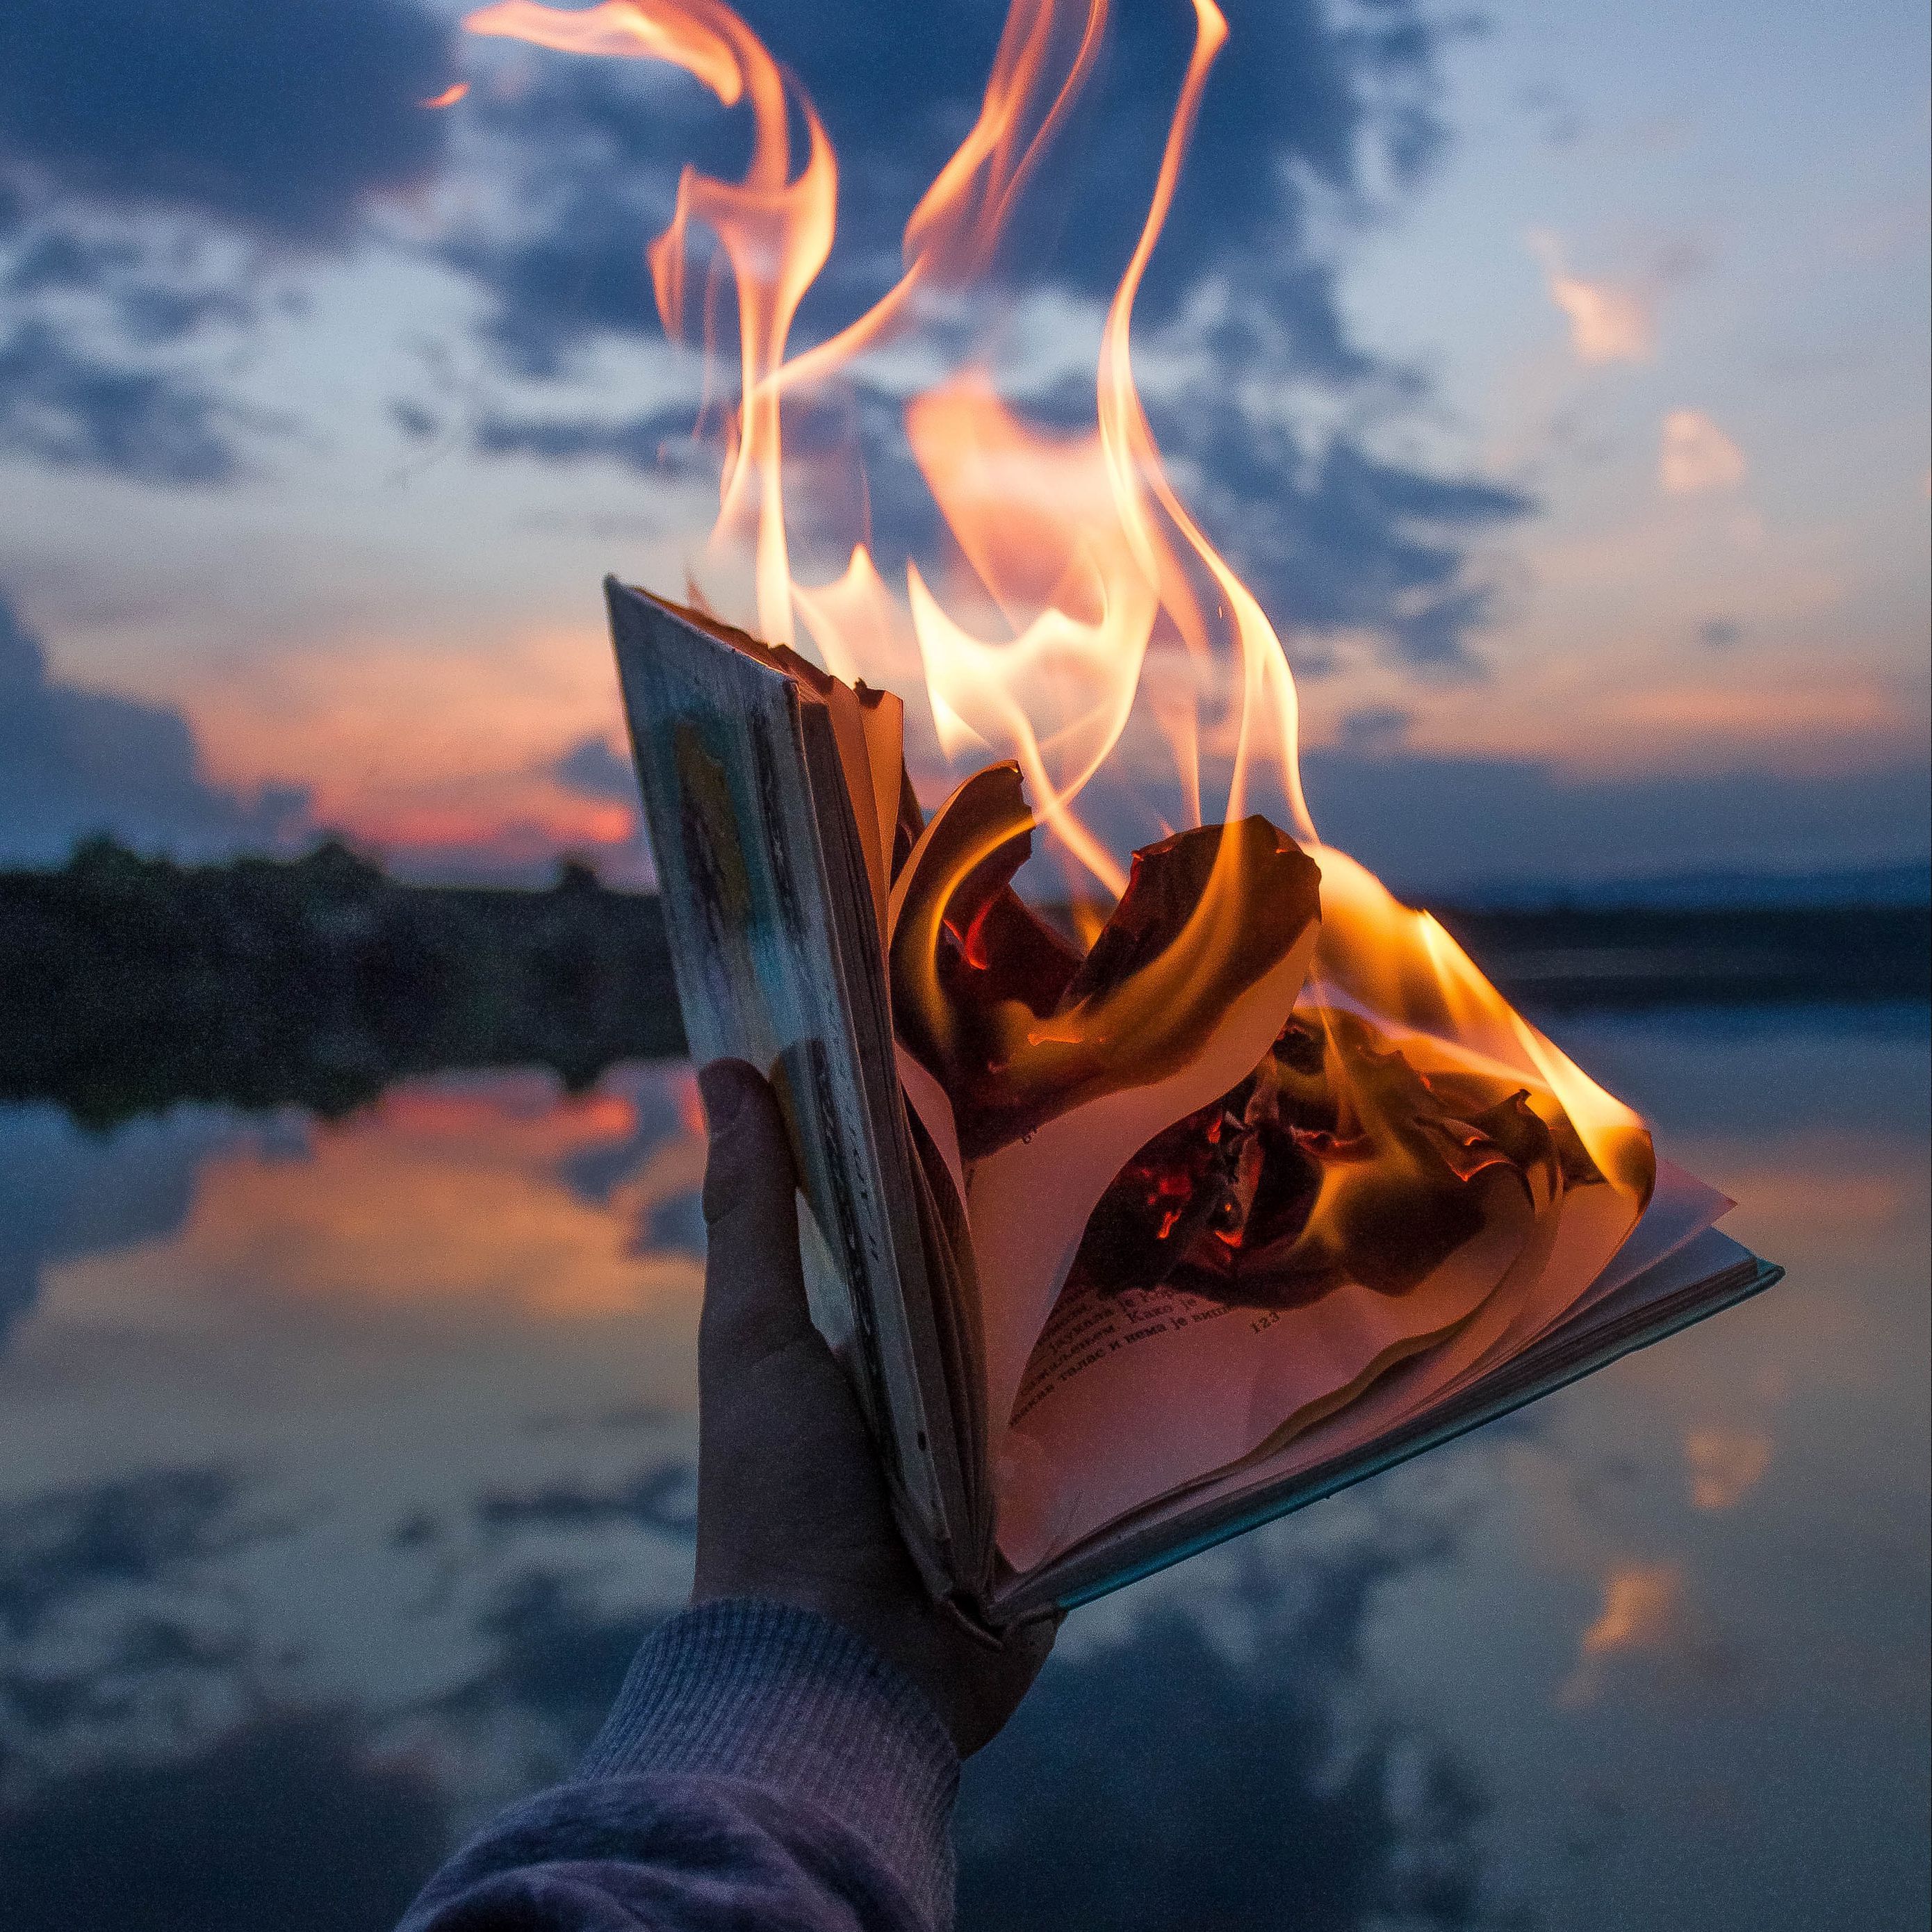 Download wallpaper 2780x2780 book, fire, hand, flame, dusk ipad air, ipad air ipad ipad ipad mini ipad mini ipad mini ipad pro 9.7 for parallax HD background